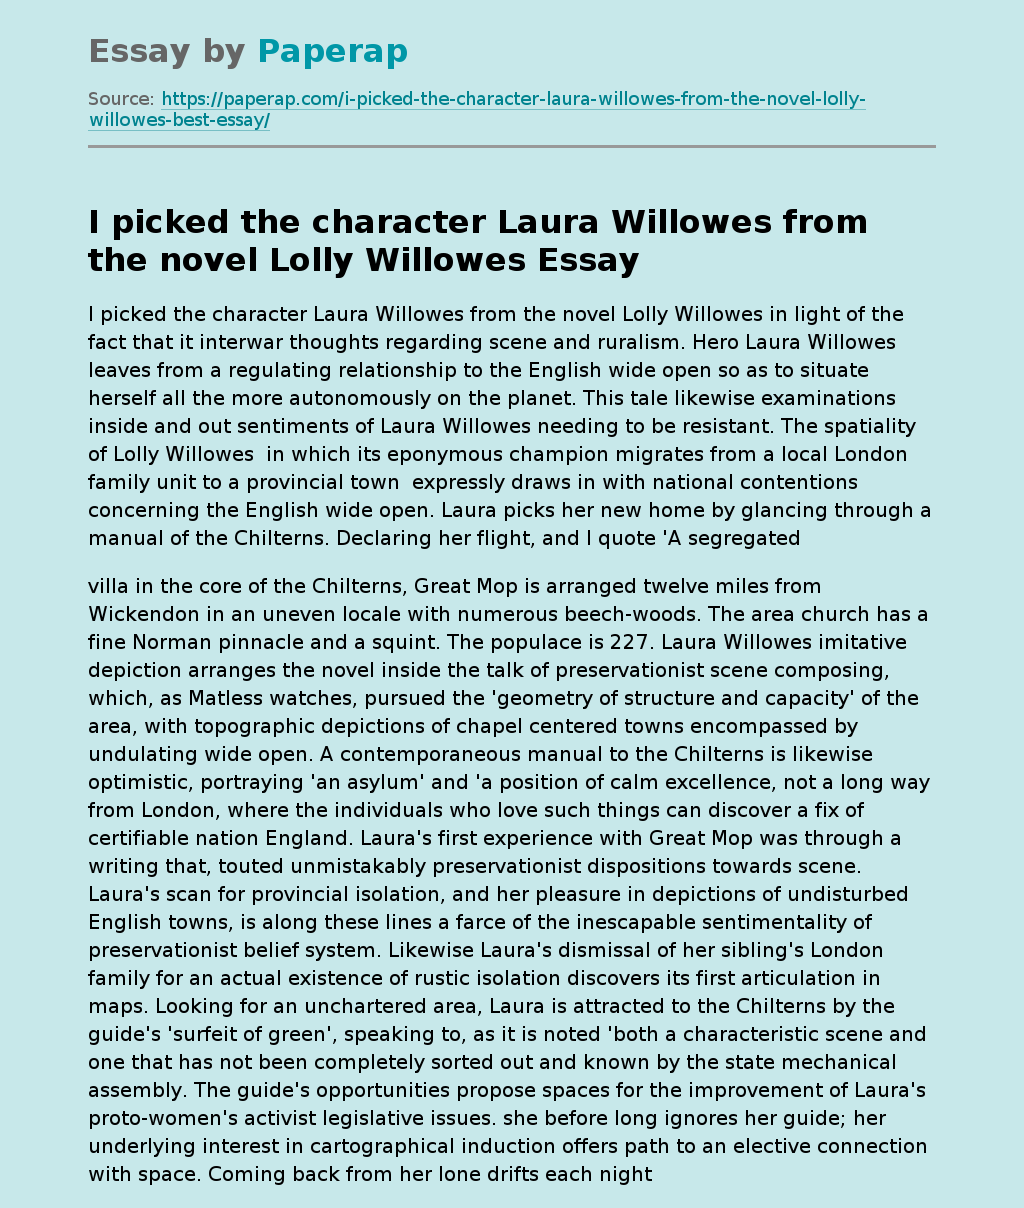 I picked the character Laura Willowes from the novel Lolly Willowes